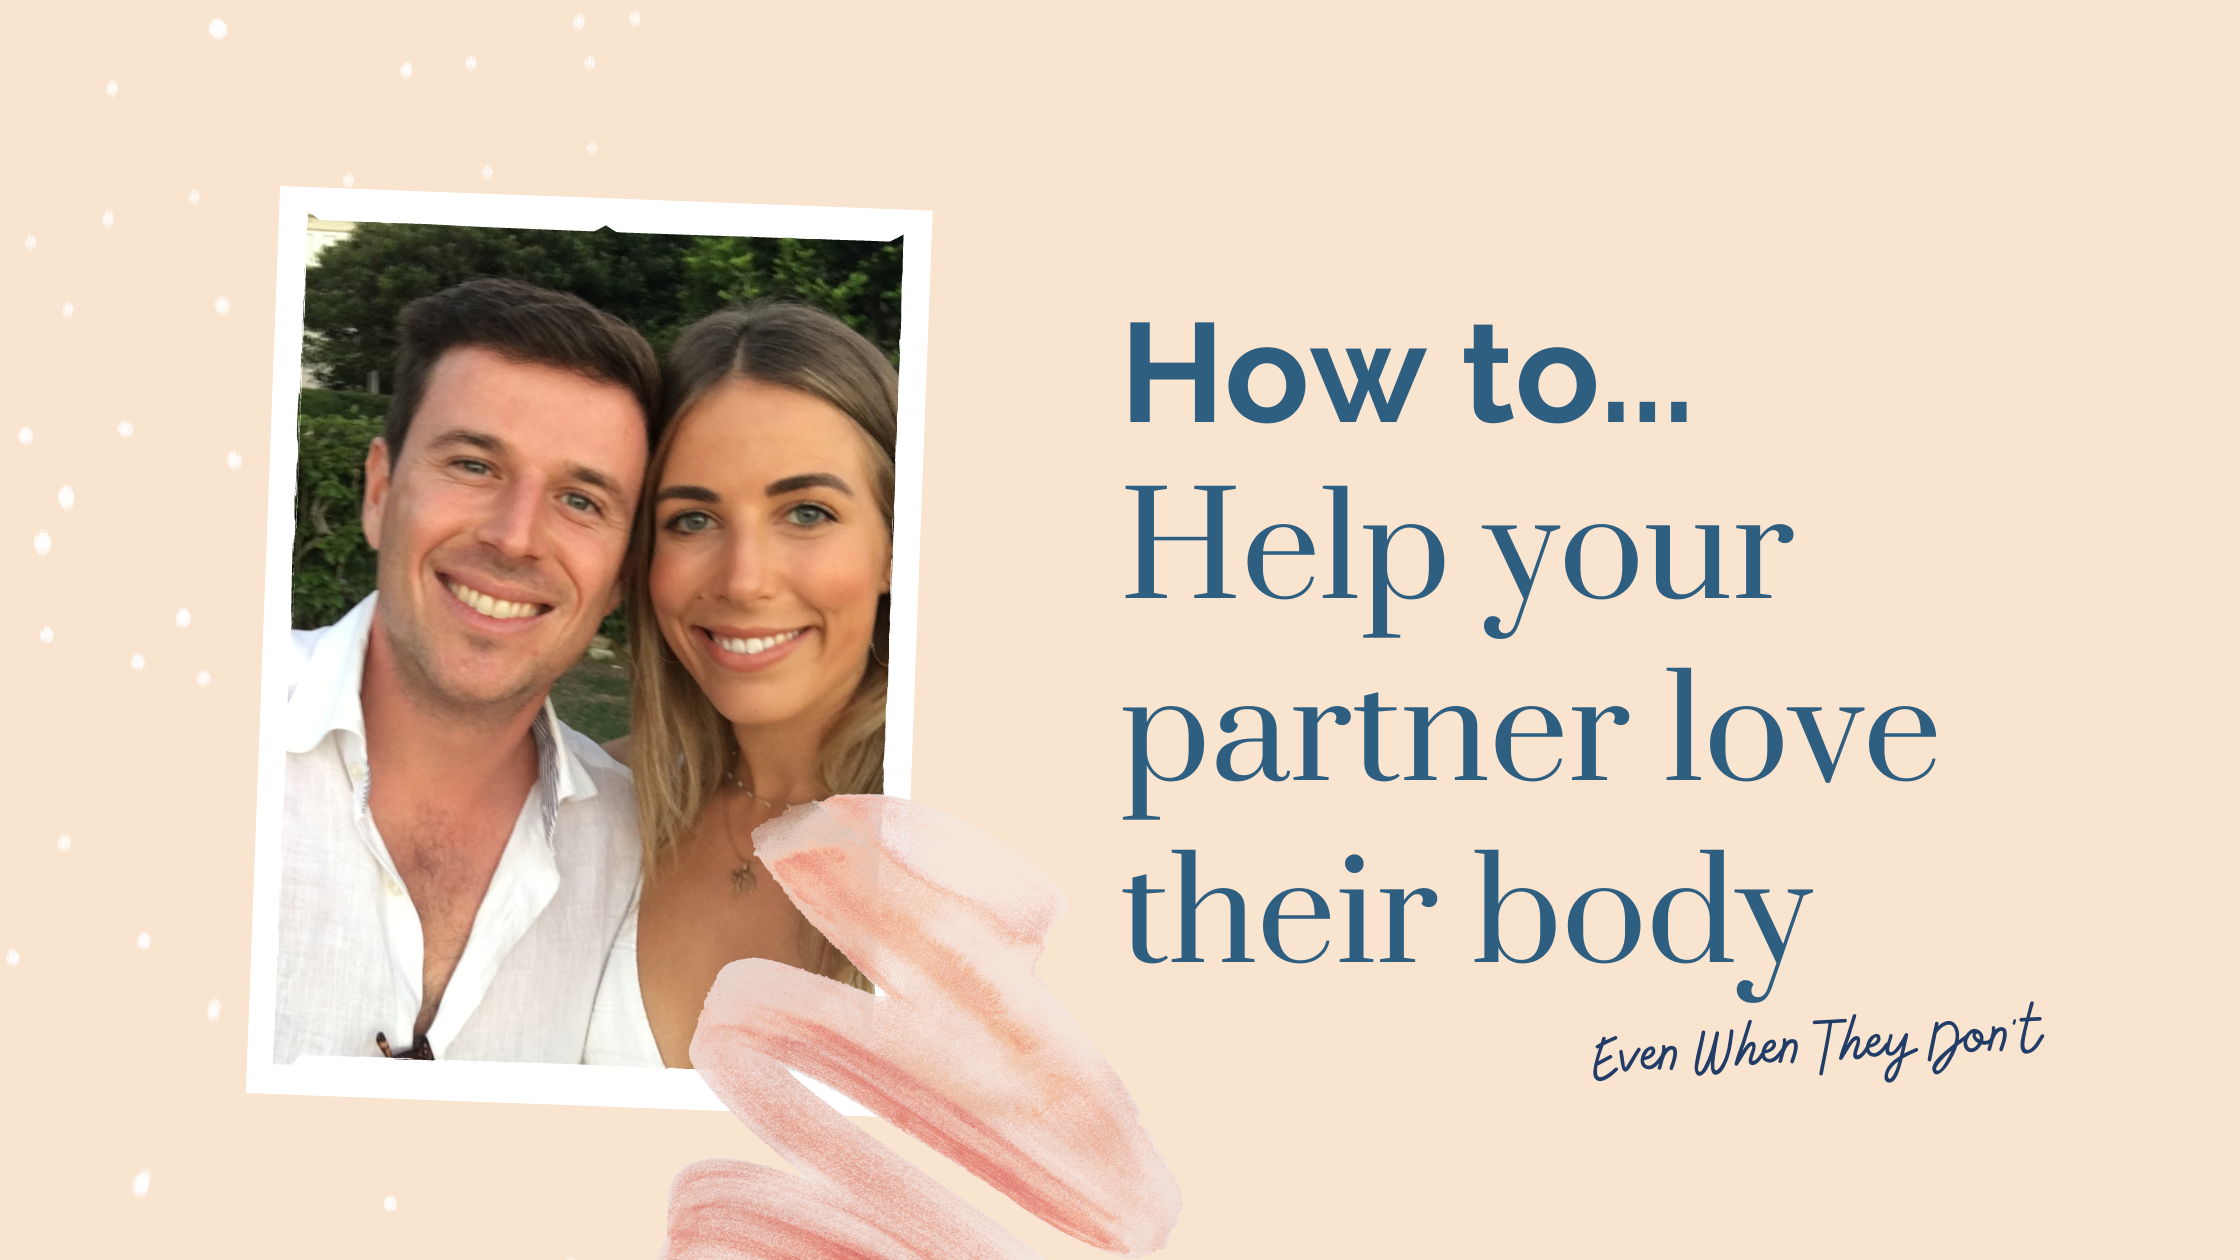 How to help your partner love their body